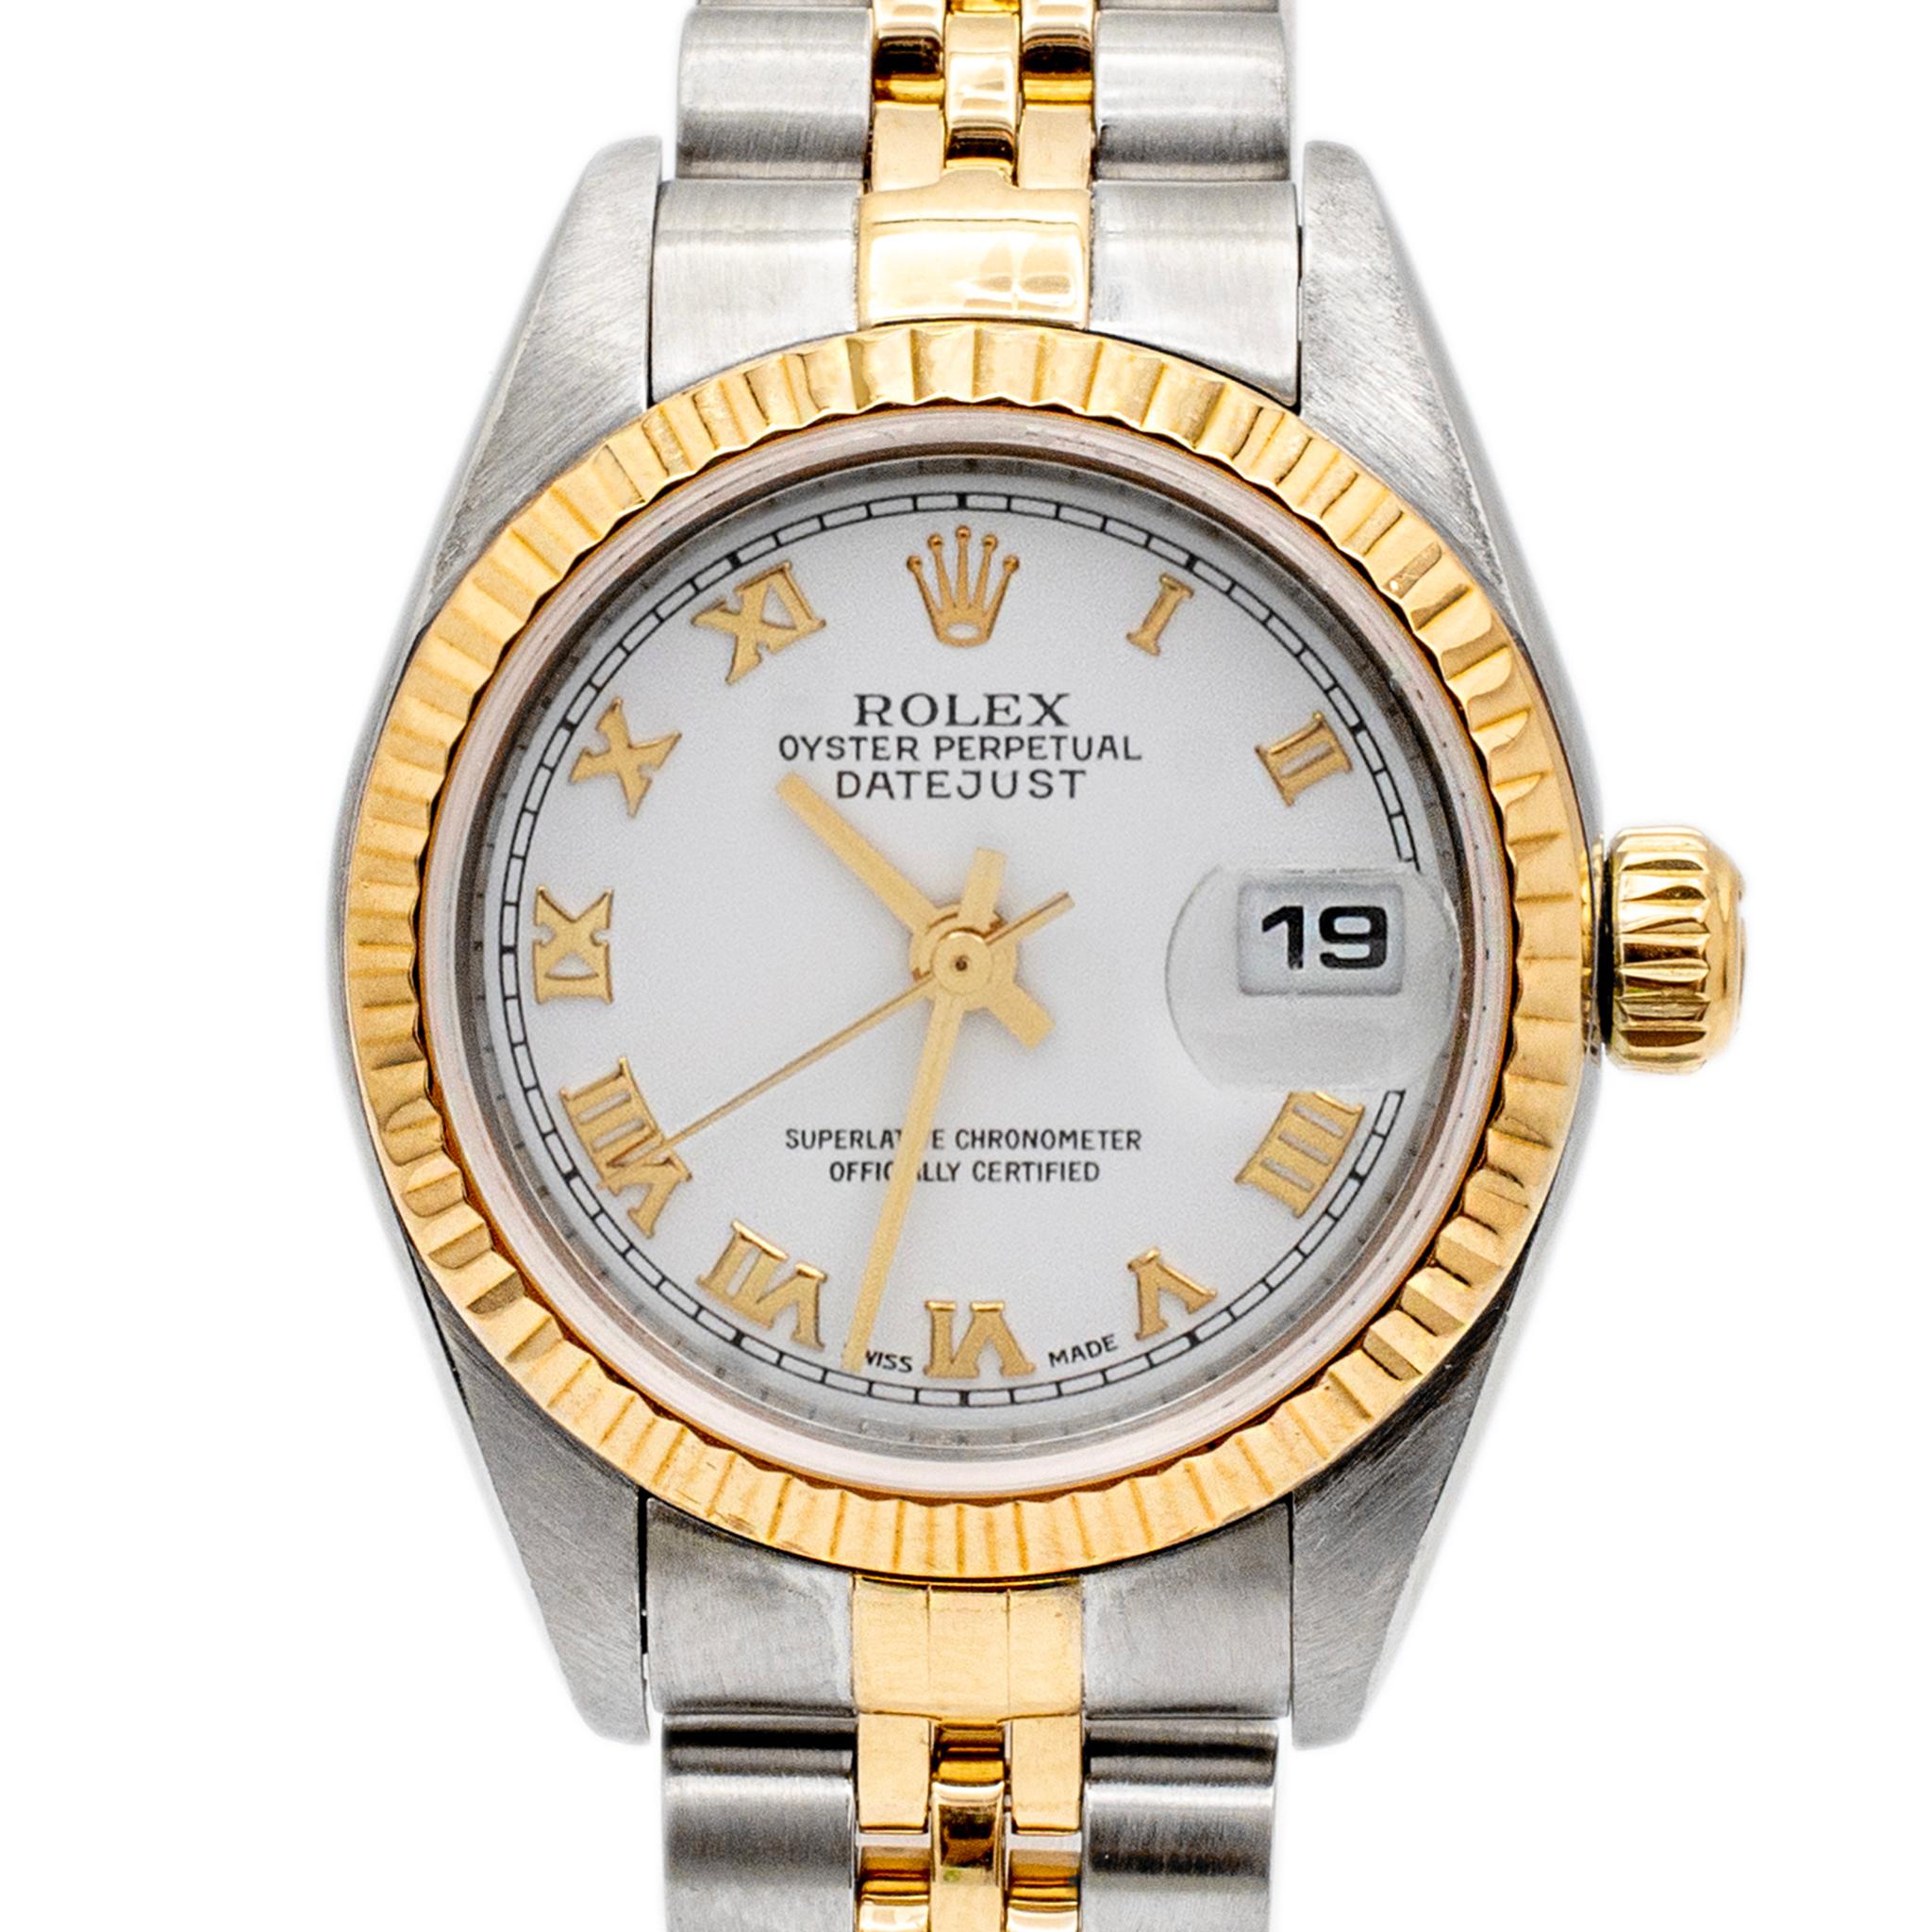 Brand: Rolex

Gender: Ladies

Metal Type: Stainless Steel & Yellow Gold

Diameter: 26.00 mm

Weight: 54.61 grams

Ladies stainless steel and 18K yellow gold ROLEX Swiss made watch with original papers. The metals were tested and determined to be